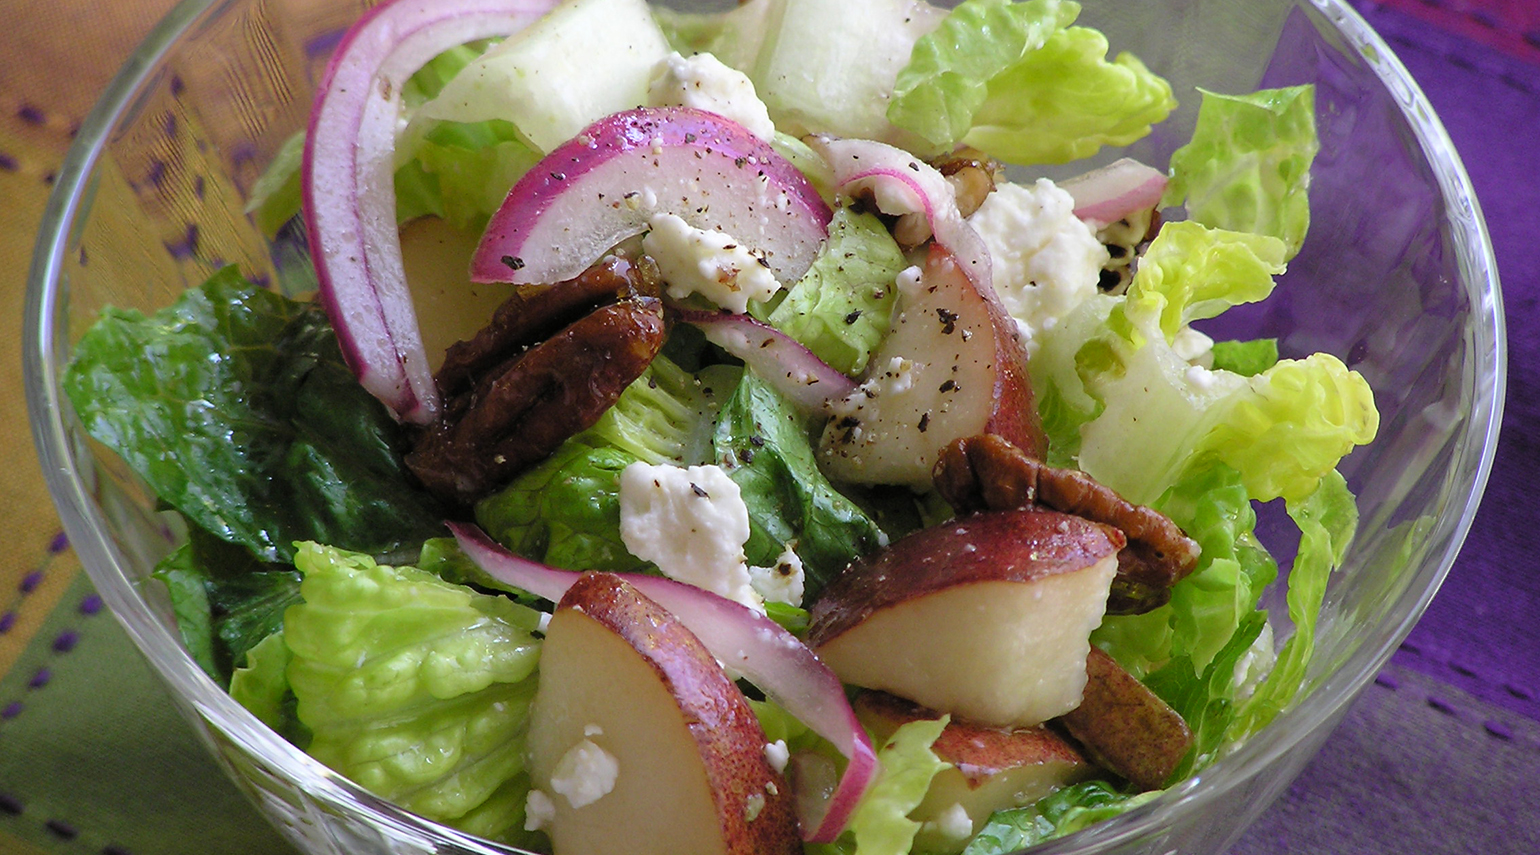 Pear and Candied Pecan Salad